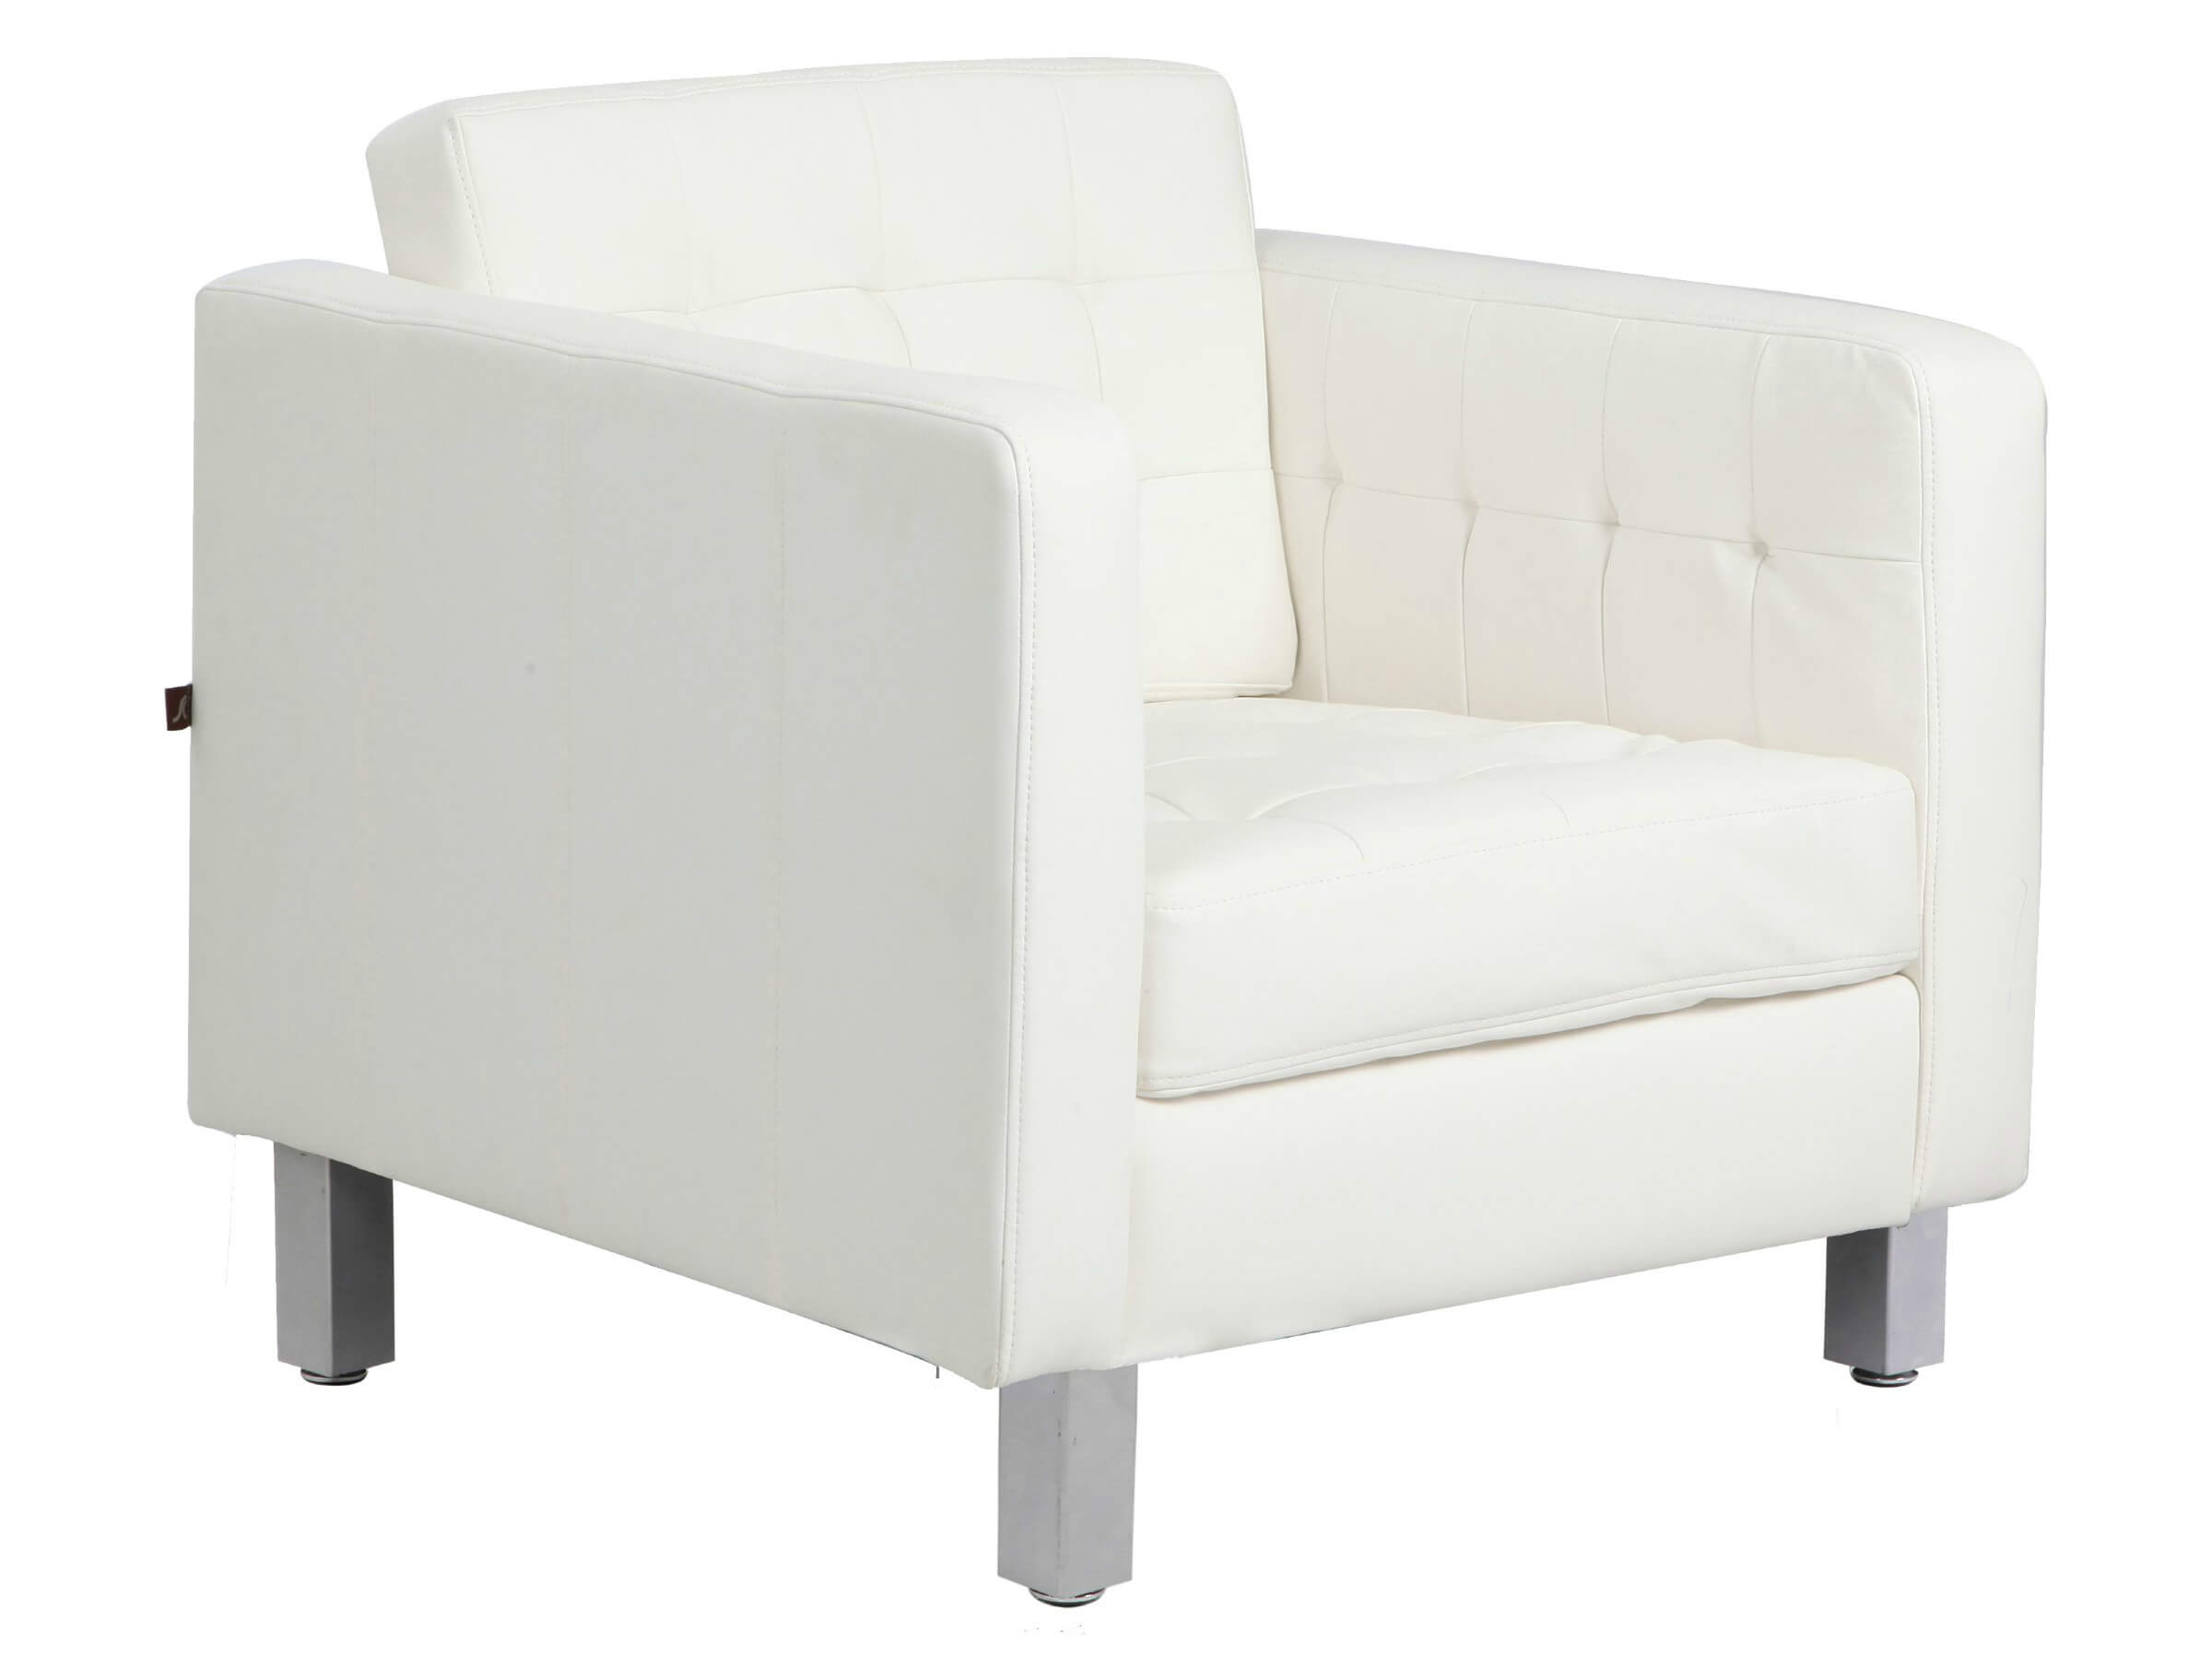 Buttoned, bonded white leather design of this Rissanti accent chair holds  wide, comfortable cushion .